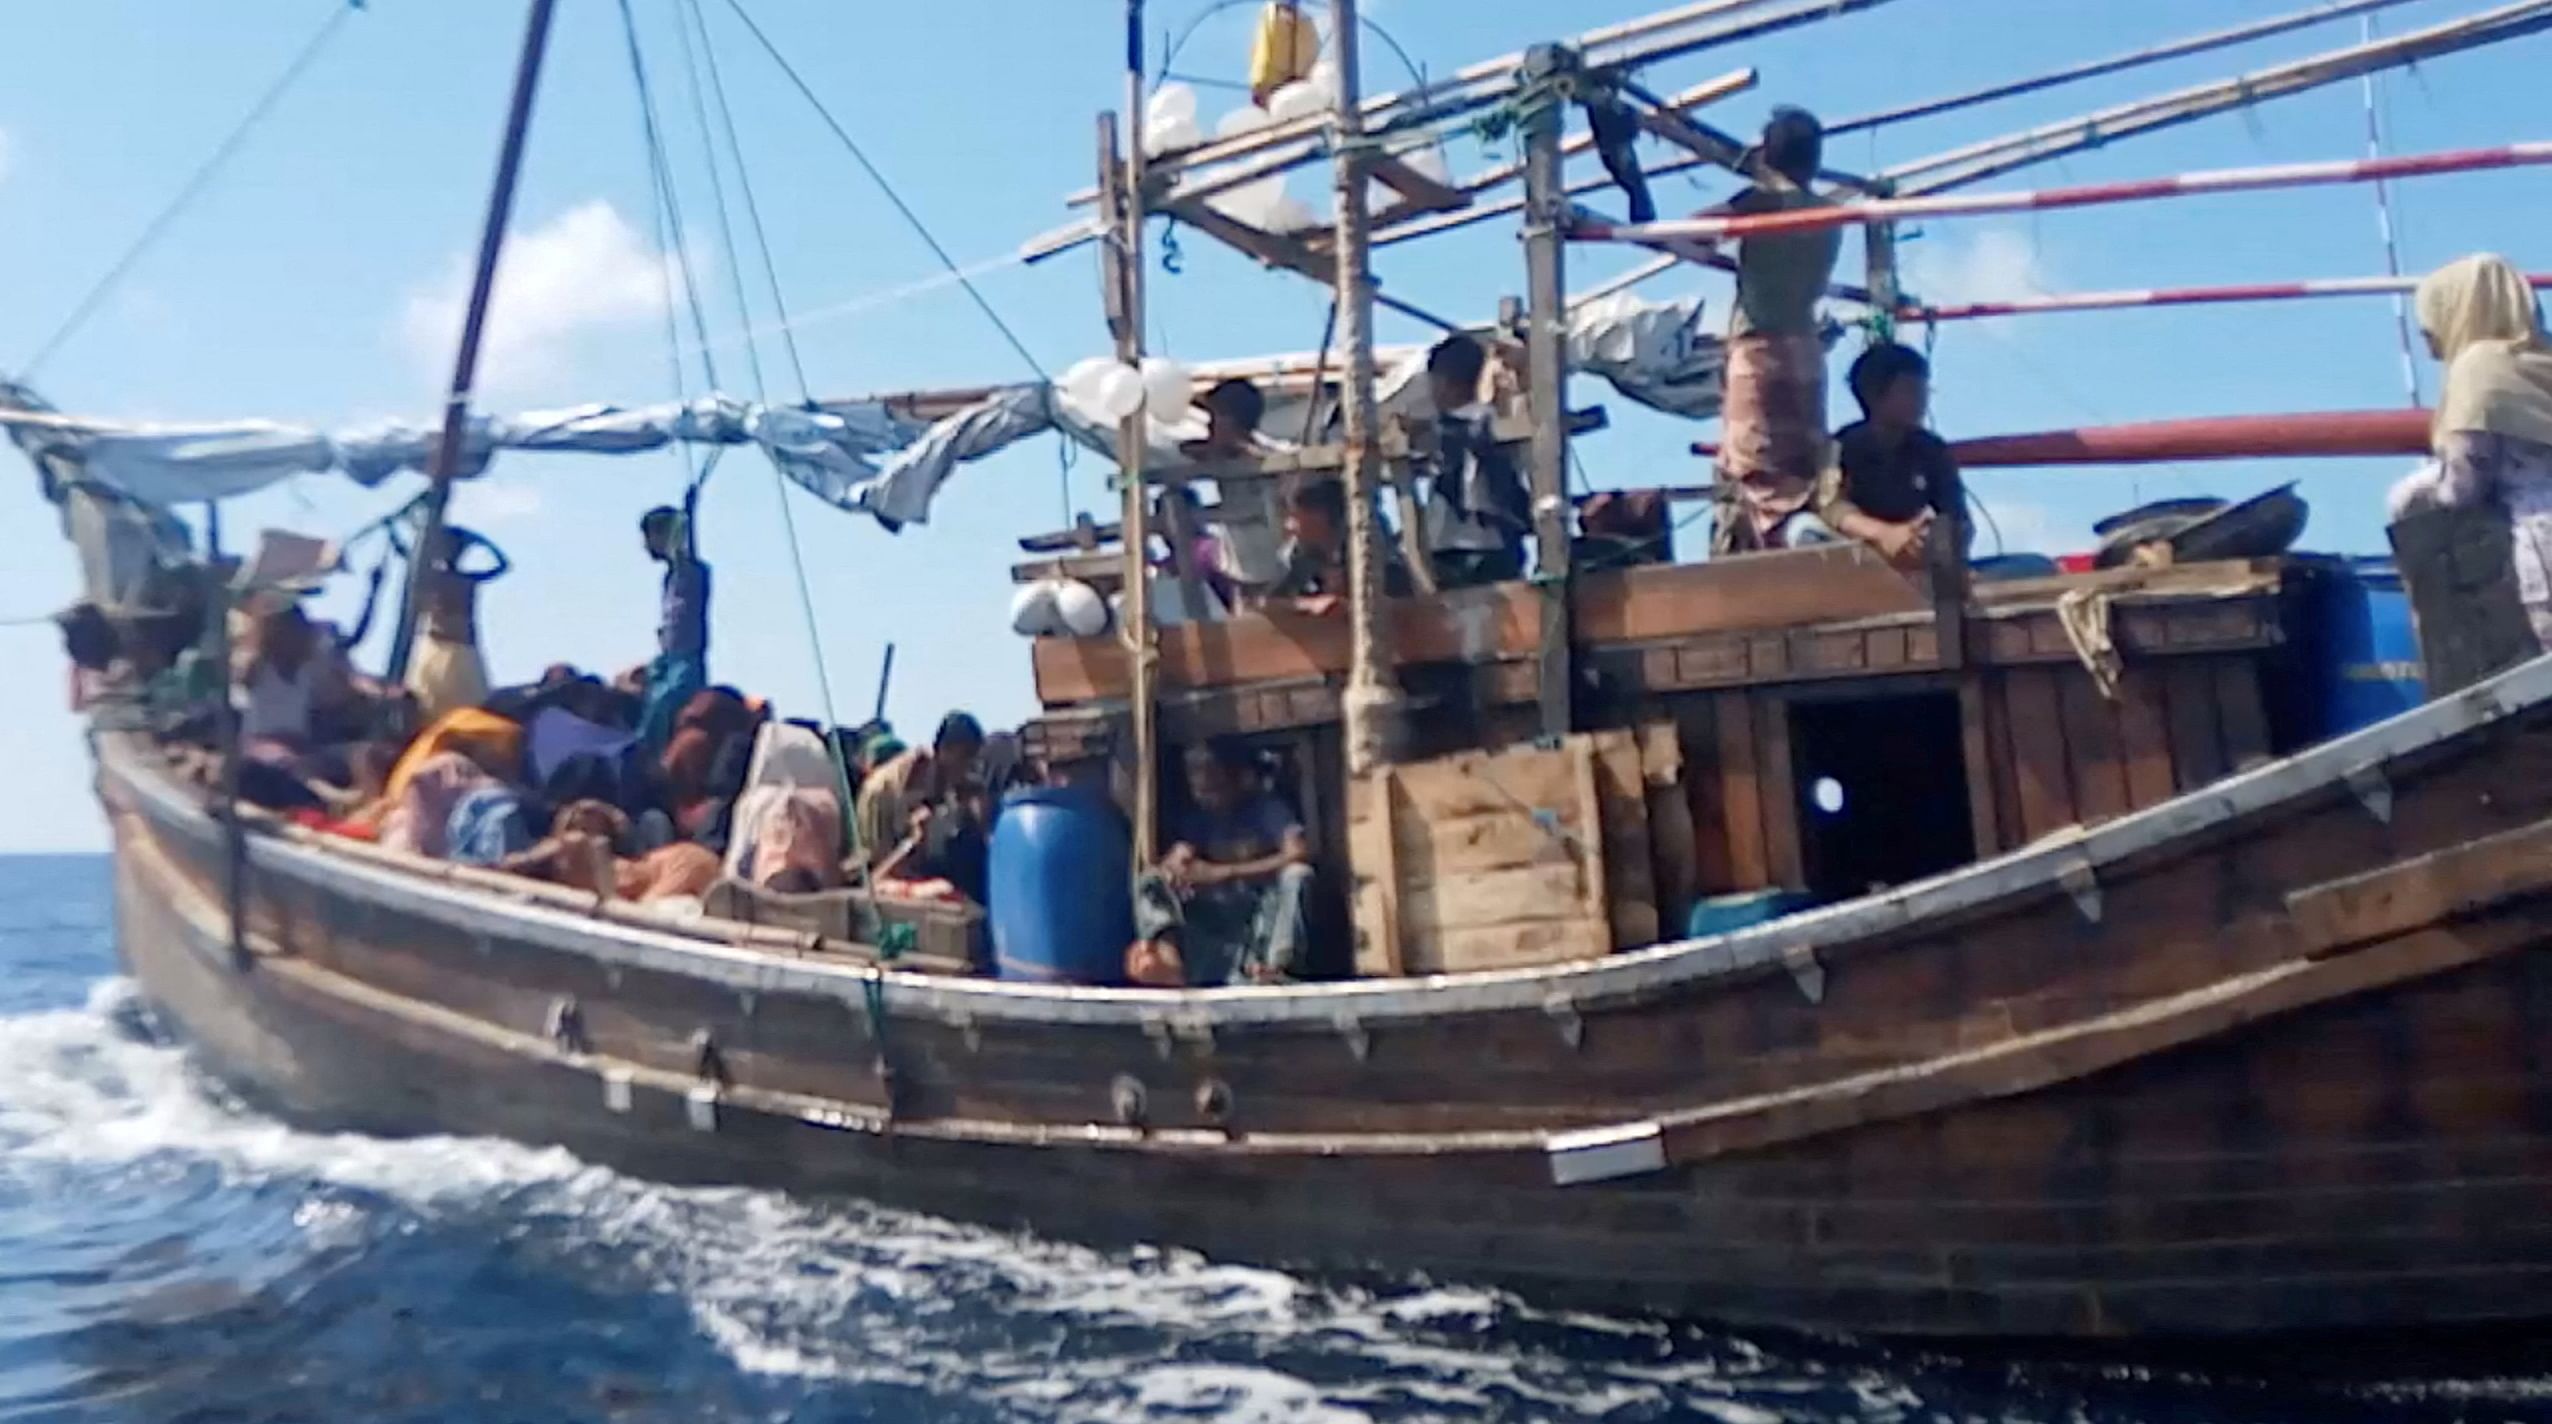 <p>A boat carries Rohingya people stranded at sea, Indonesia, December 27, 2021, in this still image obtained from a social media video. Aditya Setiawan/via REUTERS THIS IMAGE HAS BEEN SUPPLIED BY A THIRD PARTY. MANDATORY CREDIT.</p>